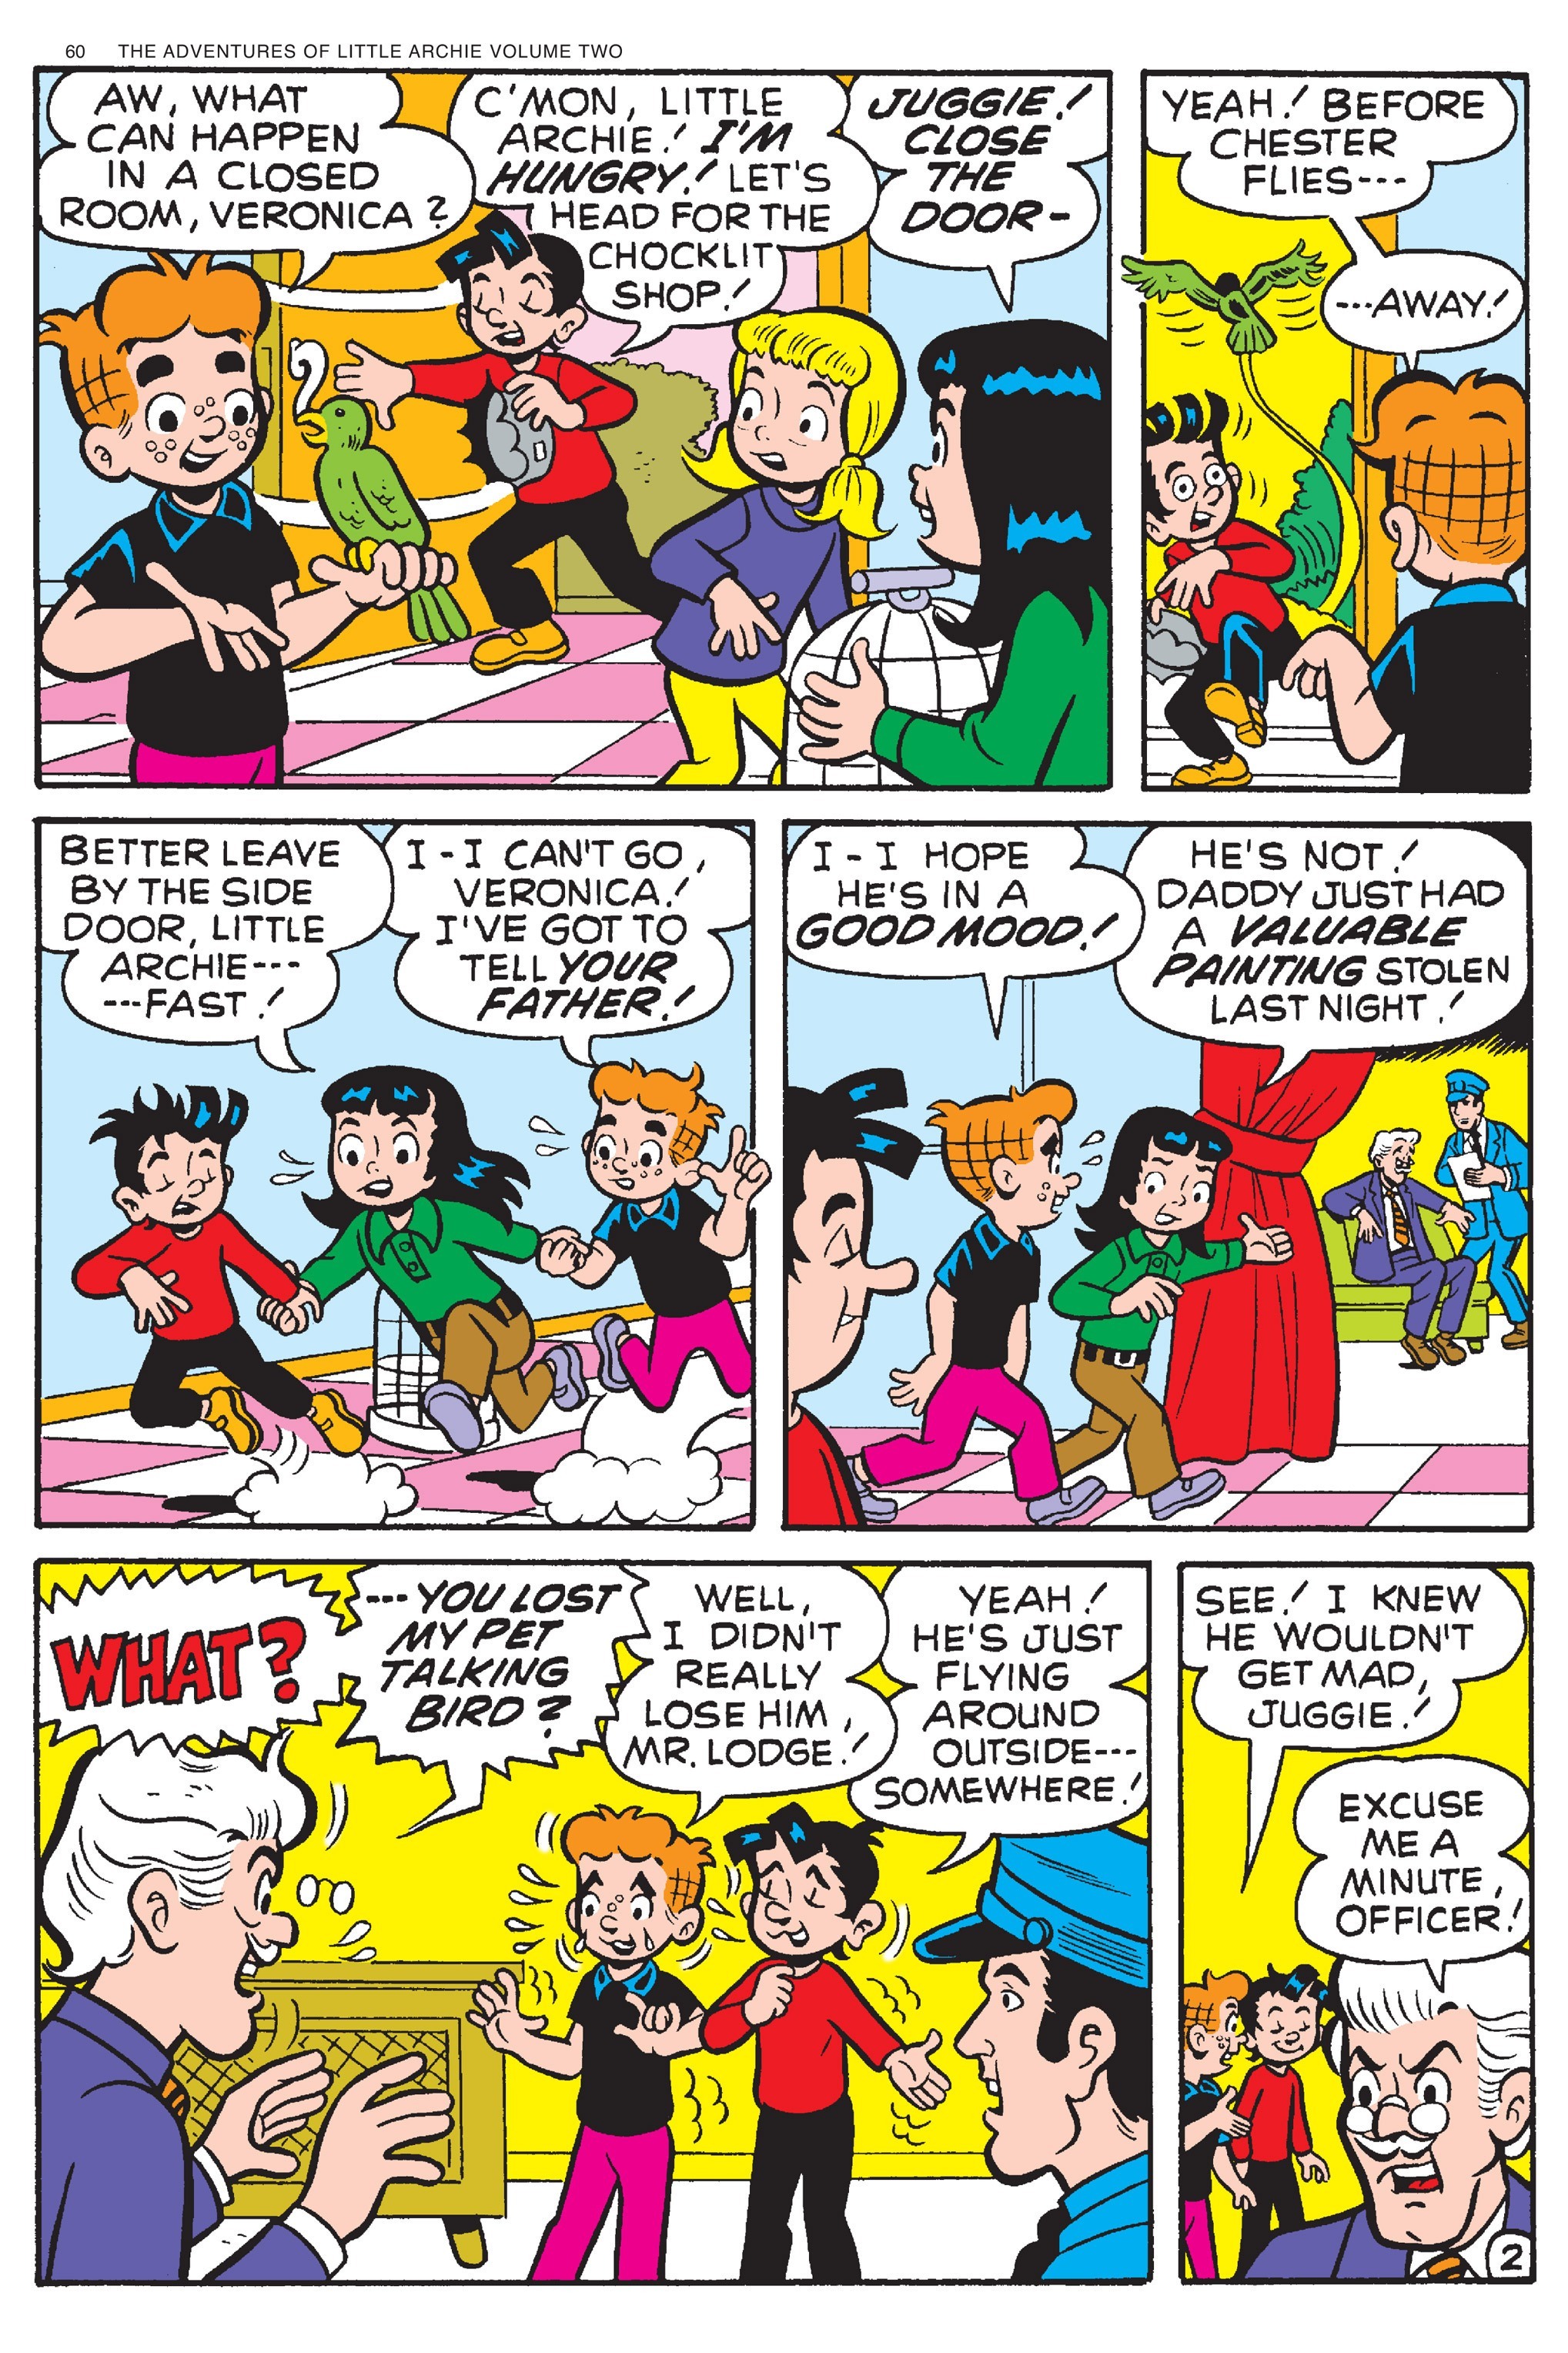 Read online Adventures of Little Archie comic -  Issue # TPB 2 - 61